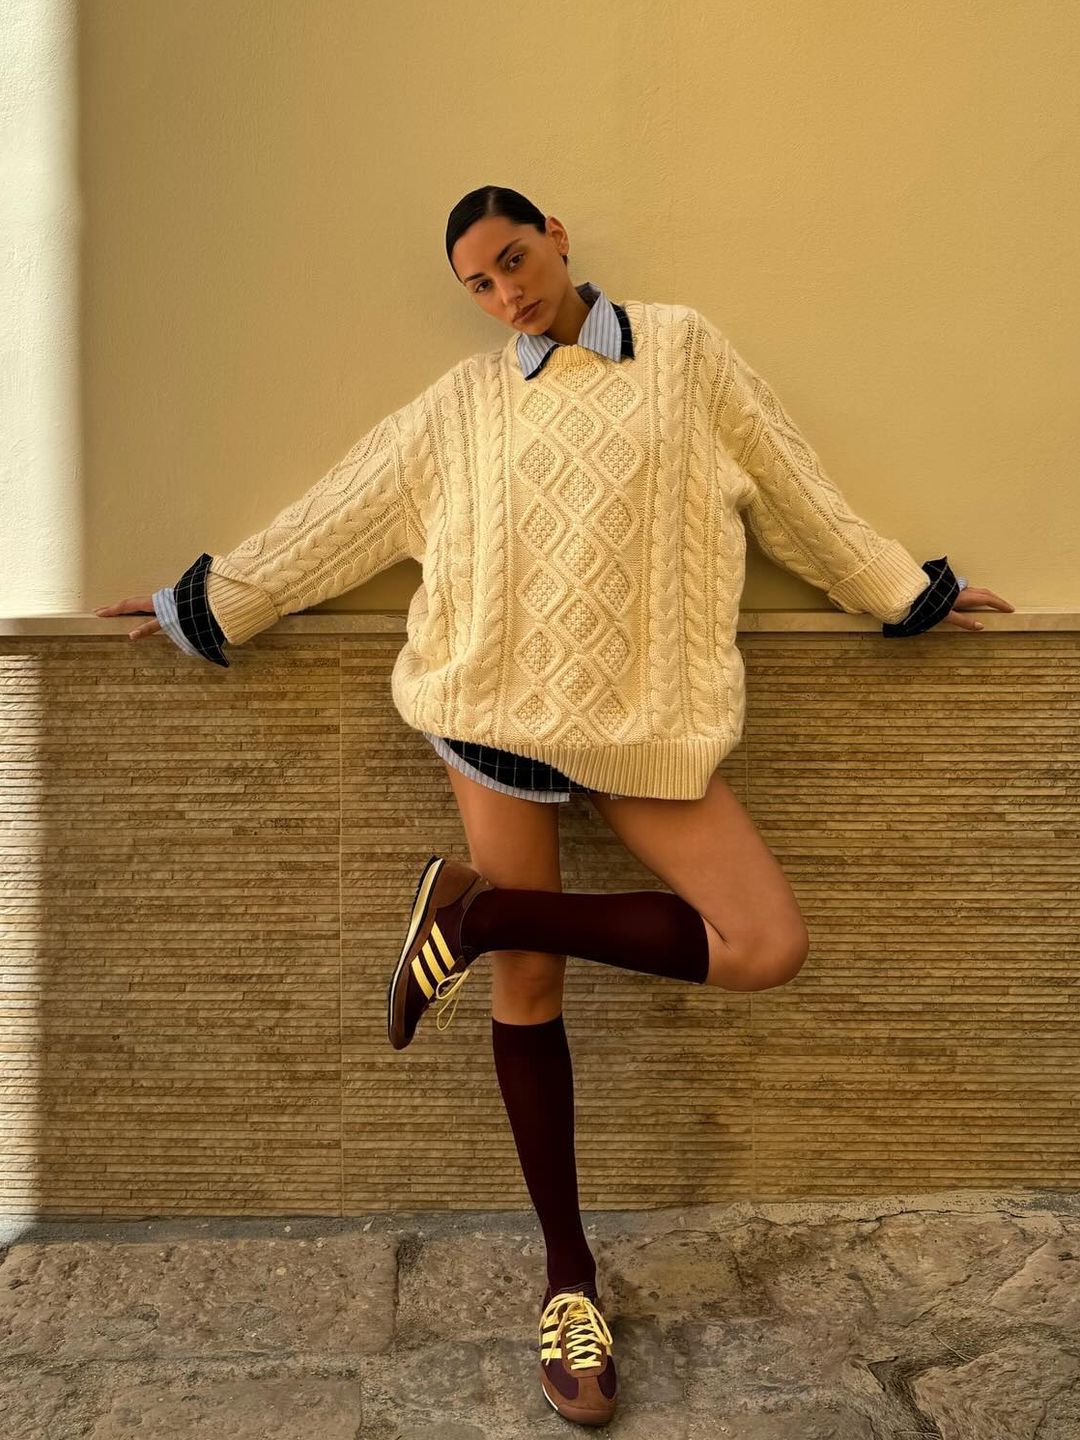 Influencer Olivia Pezzente poses in adidas trainers and a yellow jumper